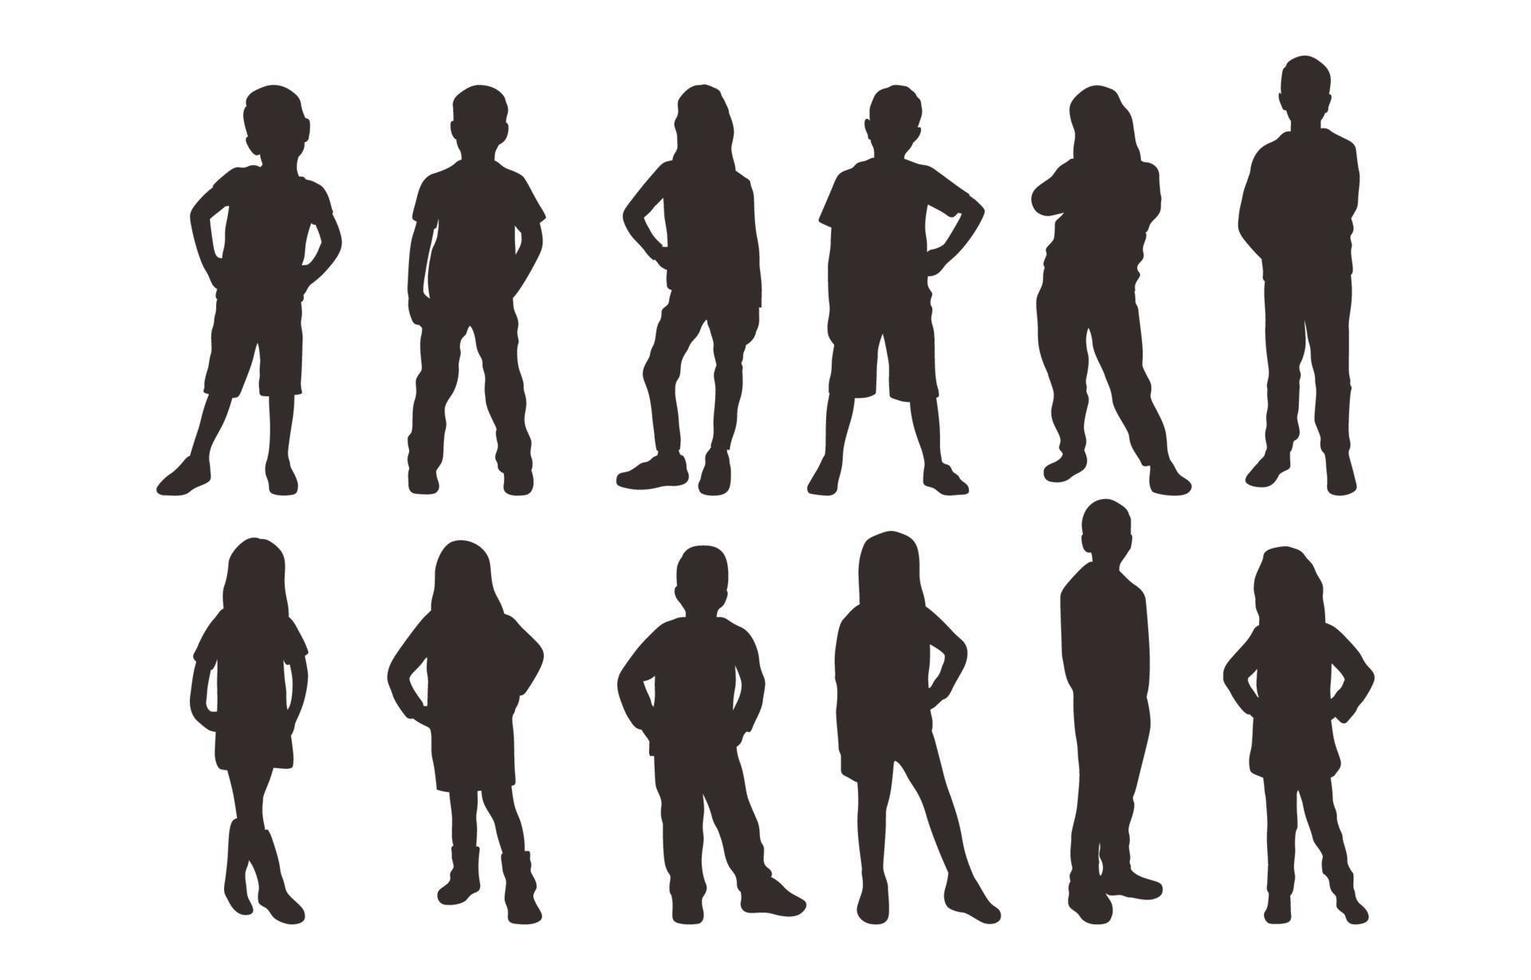 Kids in Various Poses Silhouette Collection vector